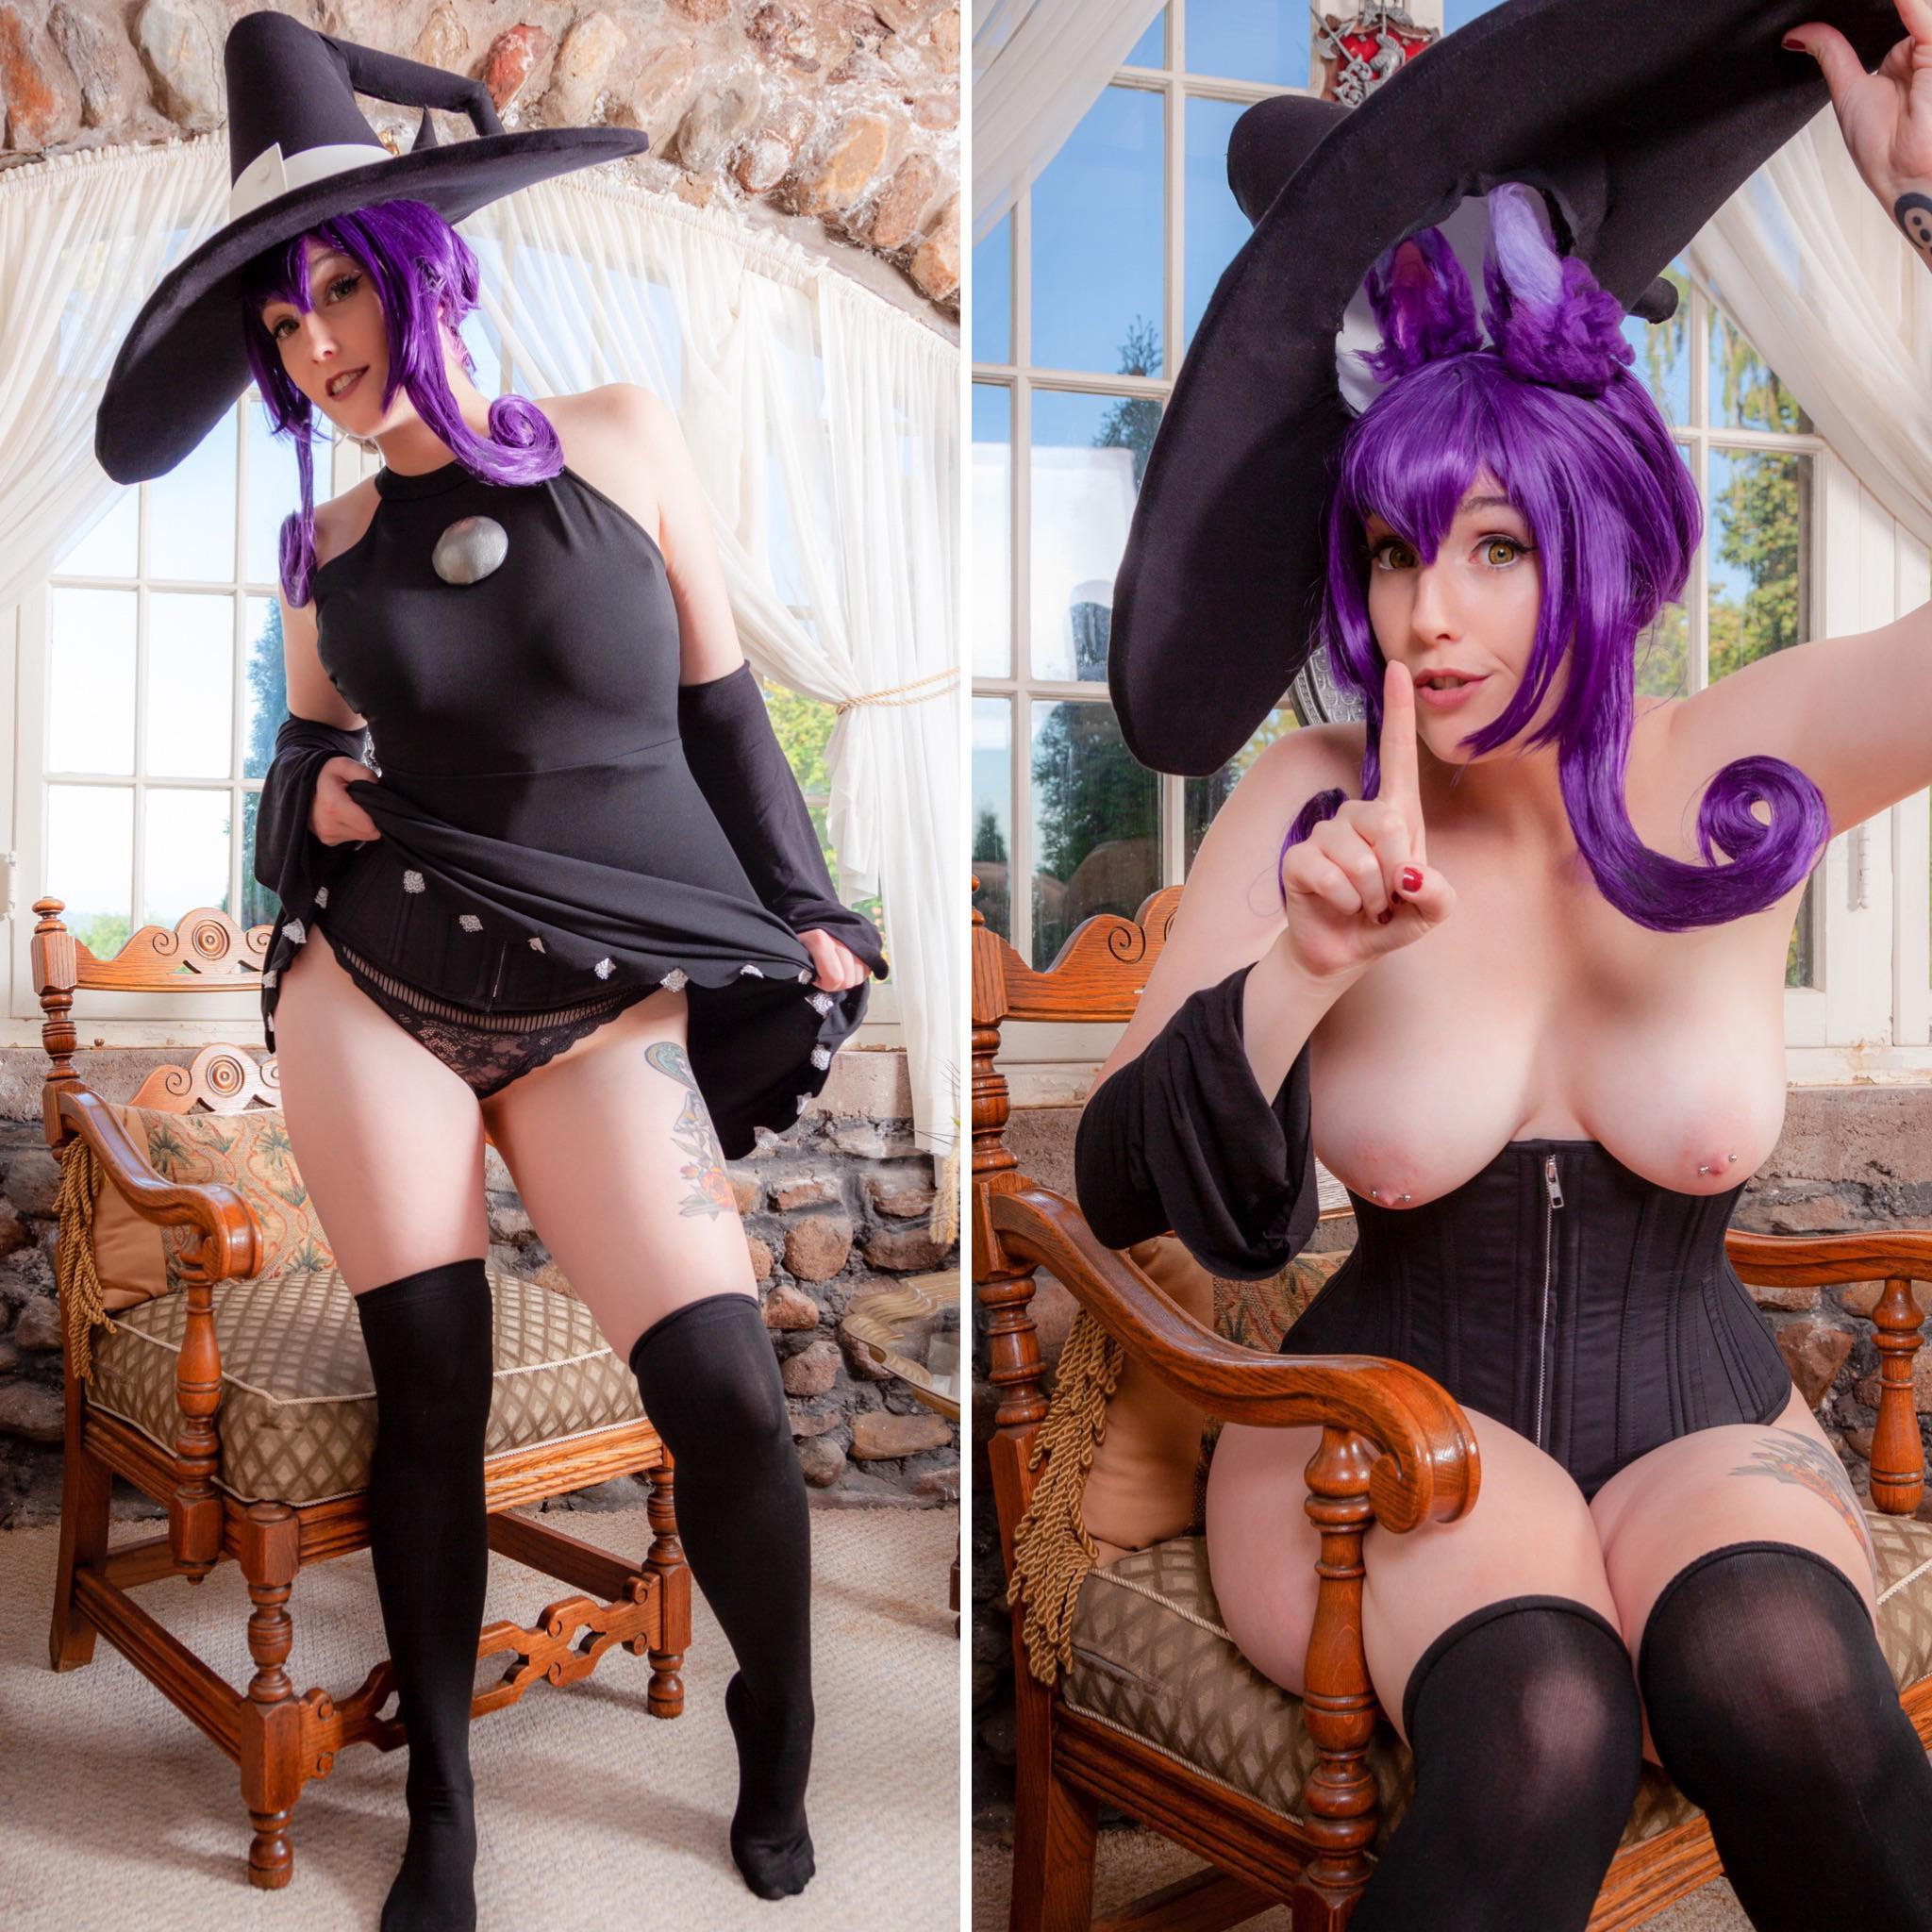 Soul Eater Cat Porn - Microkitty as Blair the Witch from soul eater - NudeCosplayGirls.com